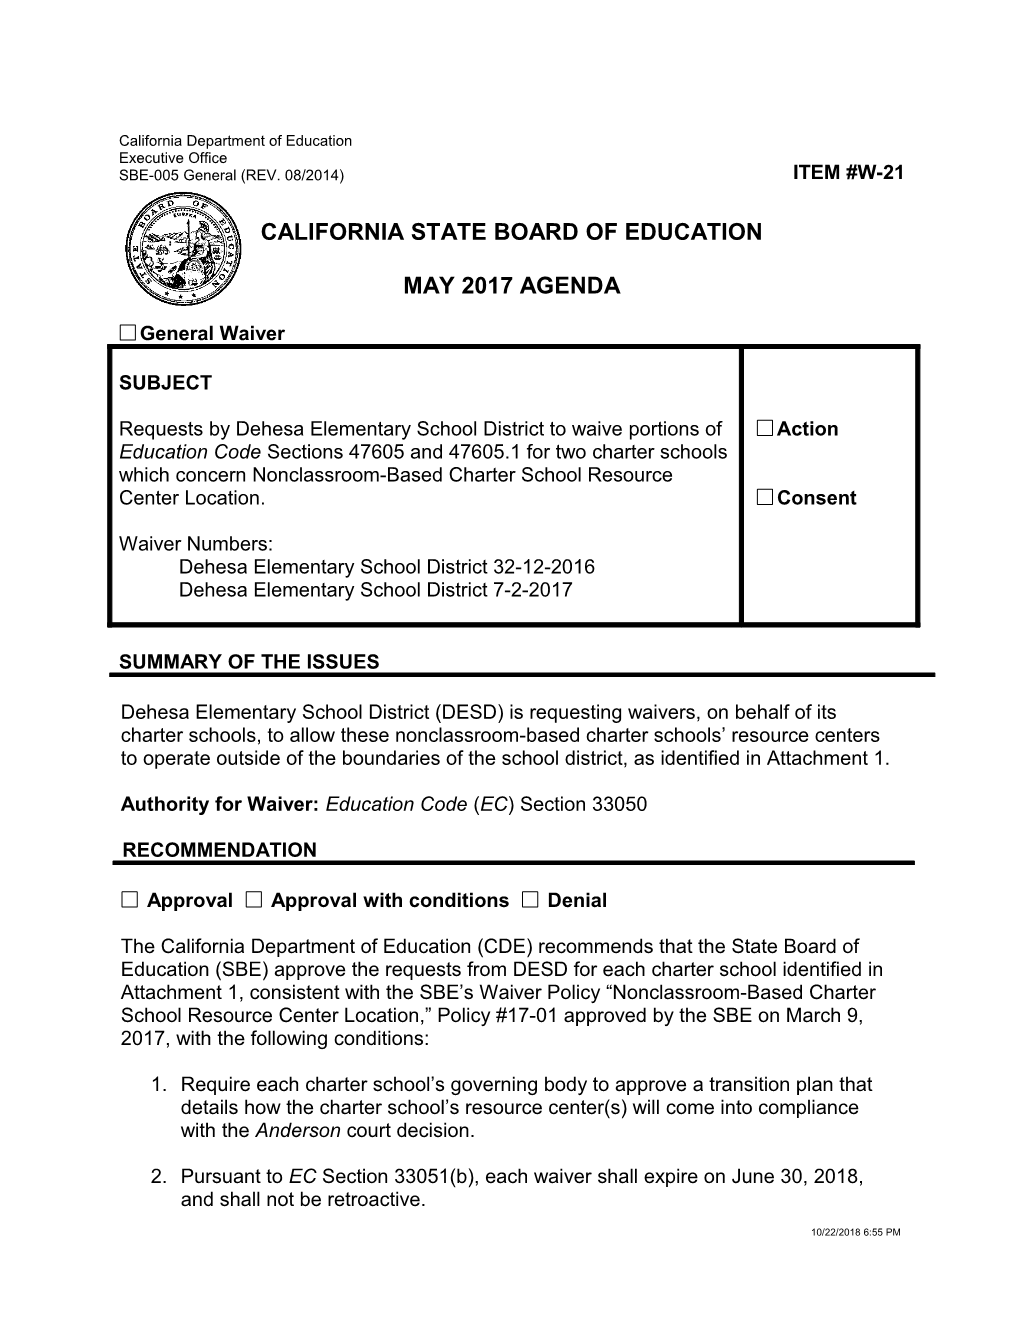 May 2017 Agenda Item W-21 - Meeting Agendas (CA State Board of Education)